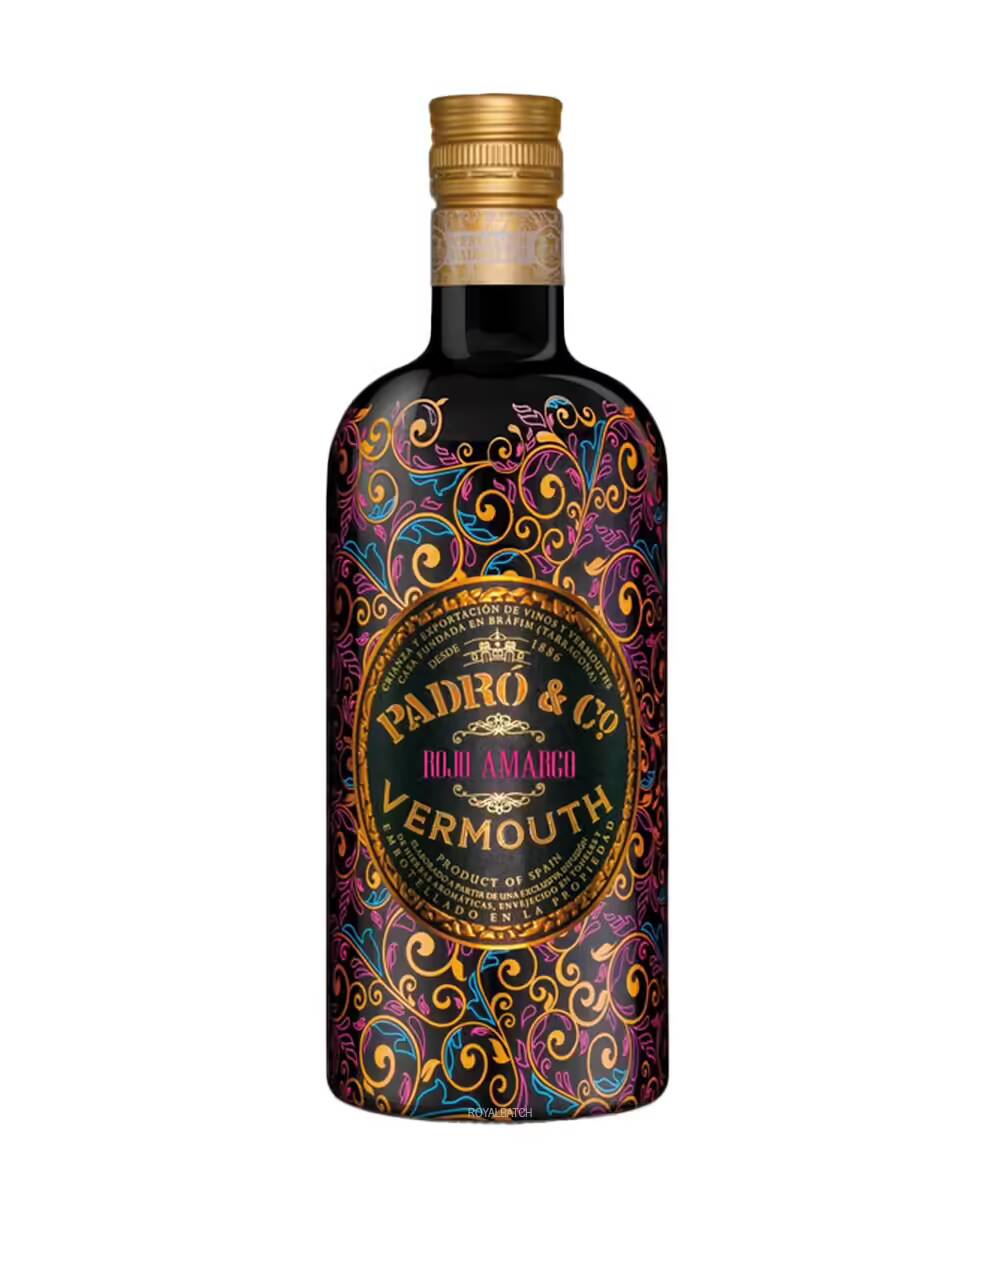 Padro and Co Rojo Amargo Vermouth